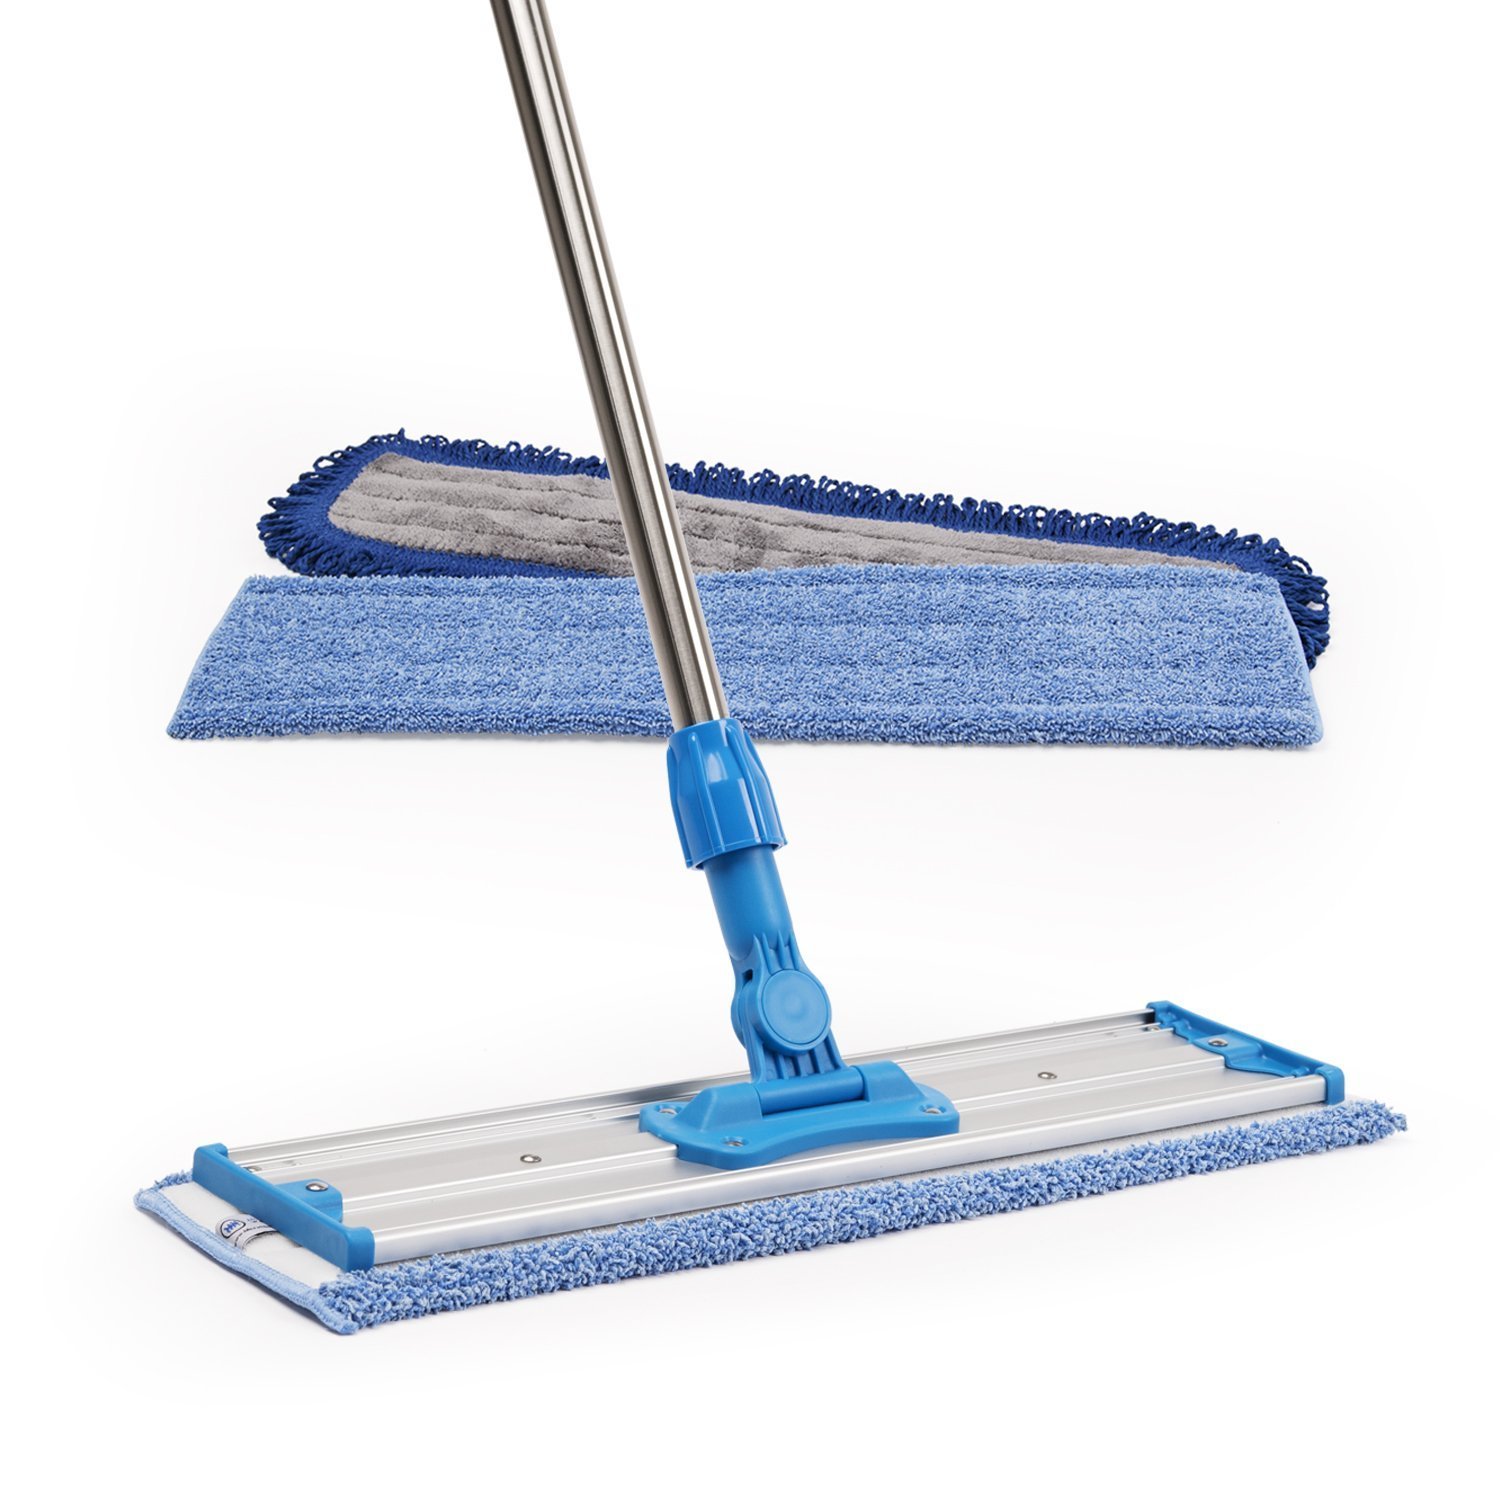 Wide range of durable and washable mop pads